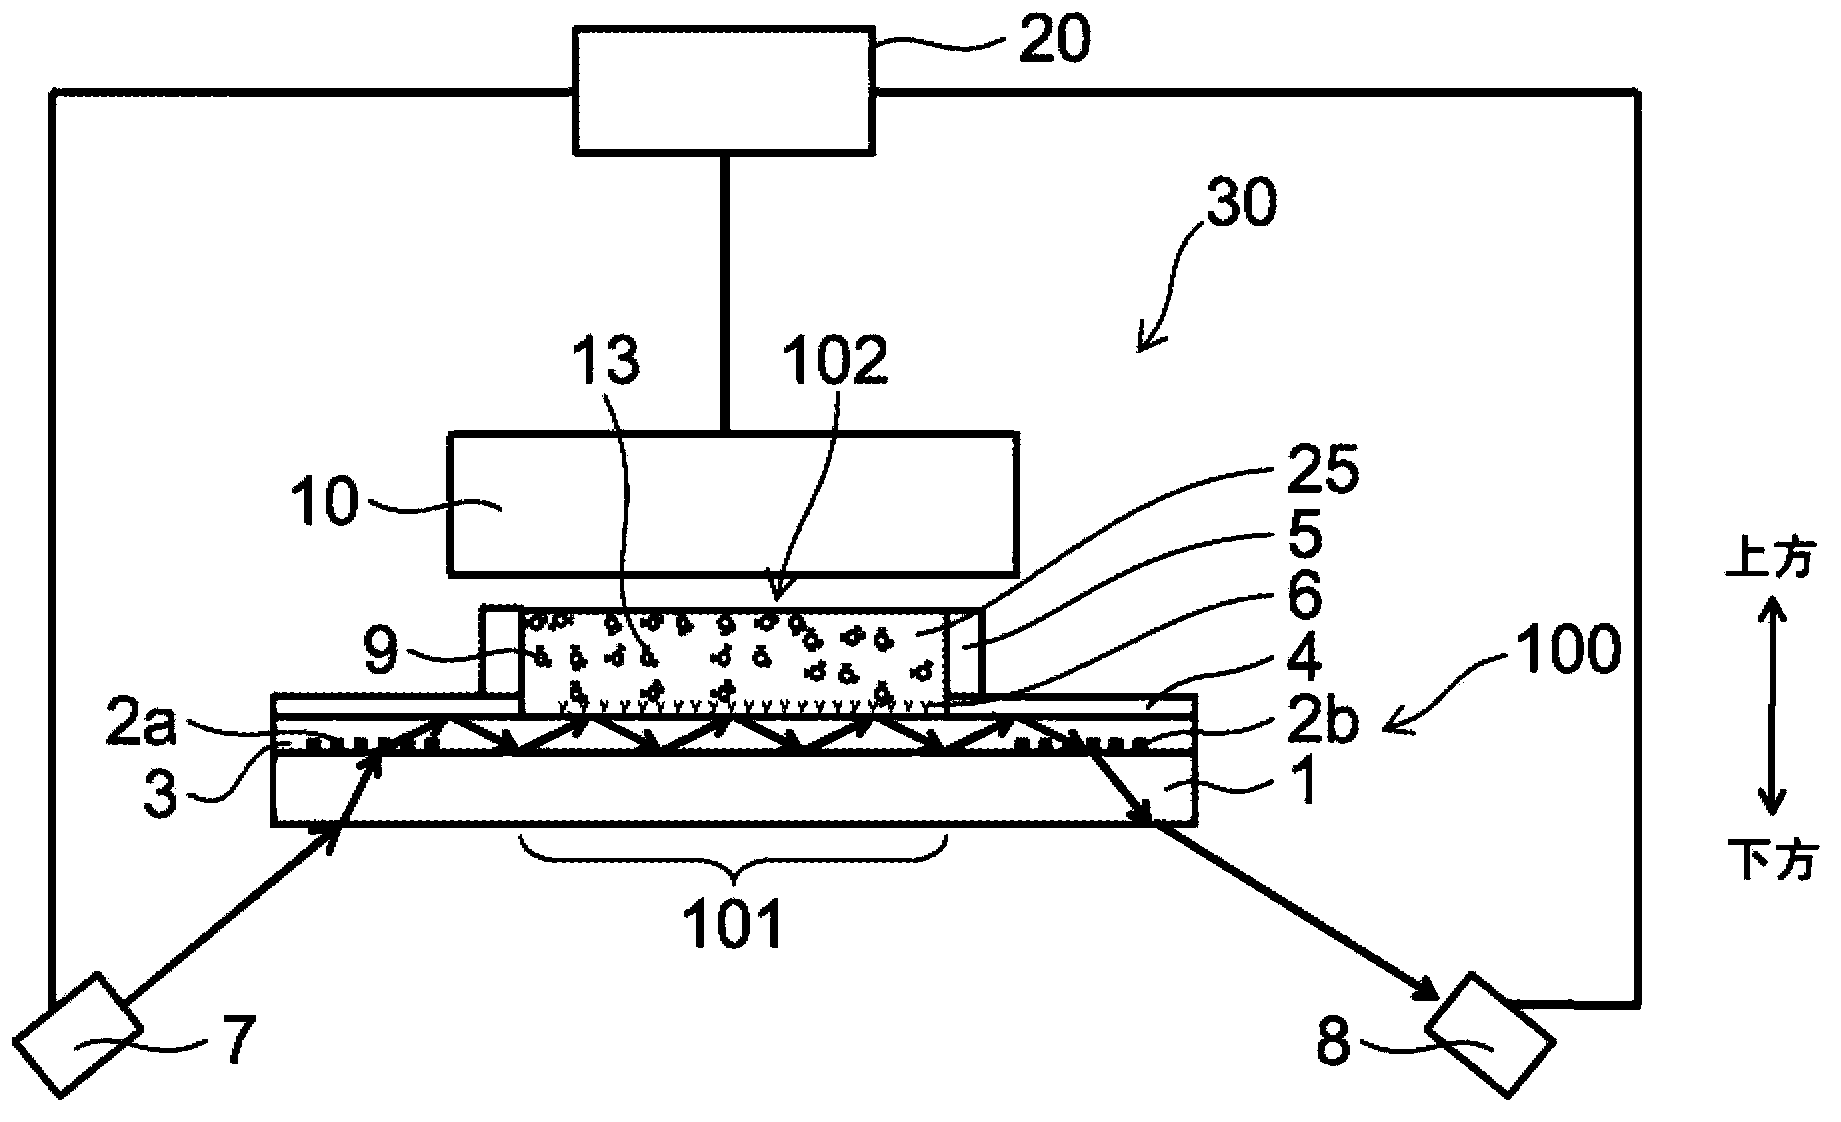 Optical waveguide measurement system and method for measuring glycated hemoglobin